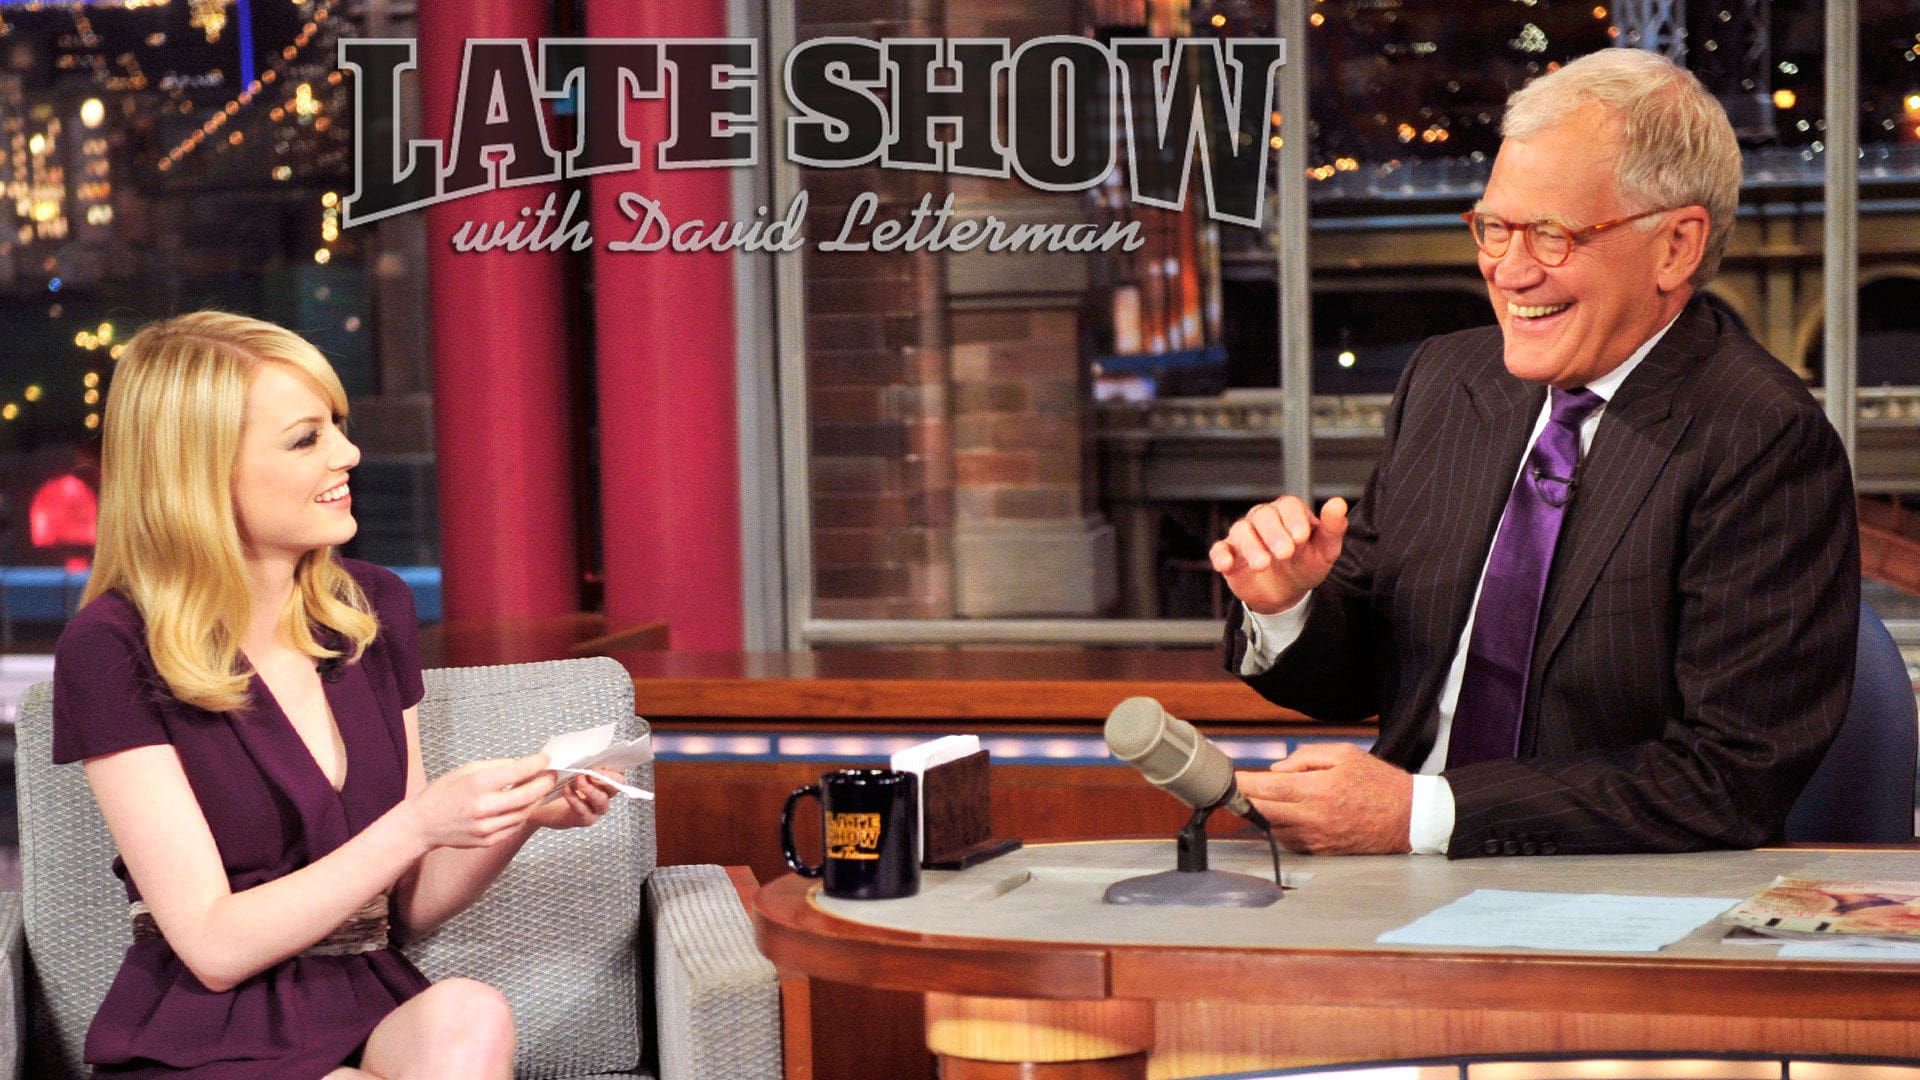 Late Show with David Letterman - Season 22 Episode 70